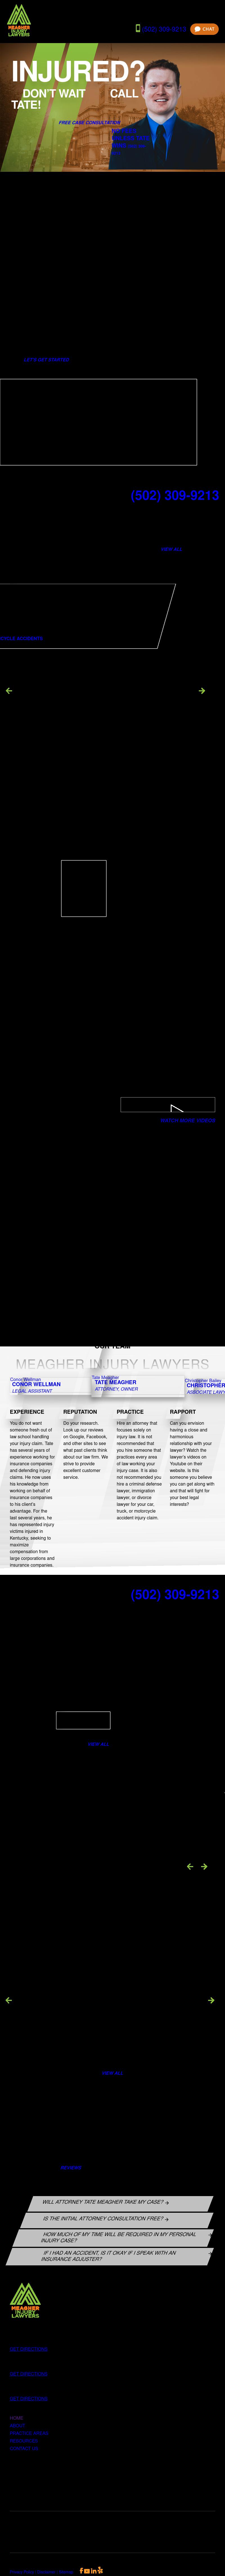 Meagher Law Office, PLLC - Louisville KY Lawyers